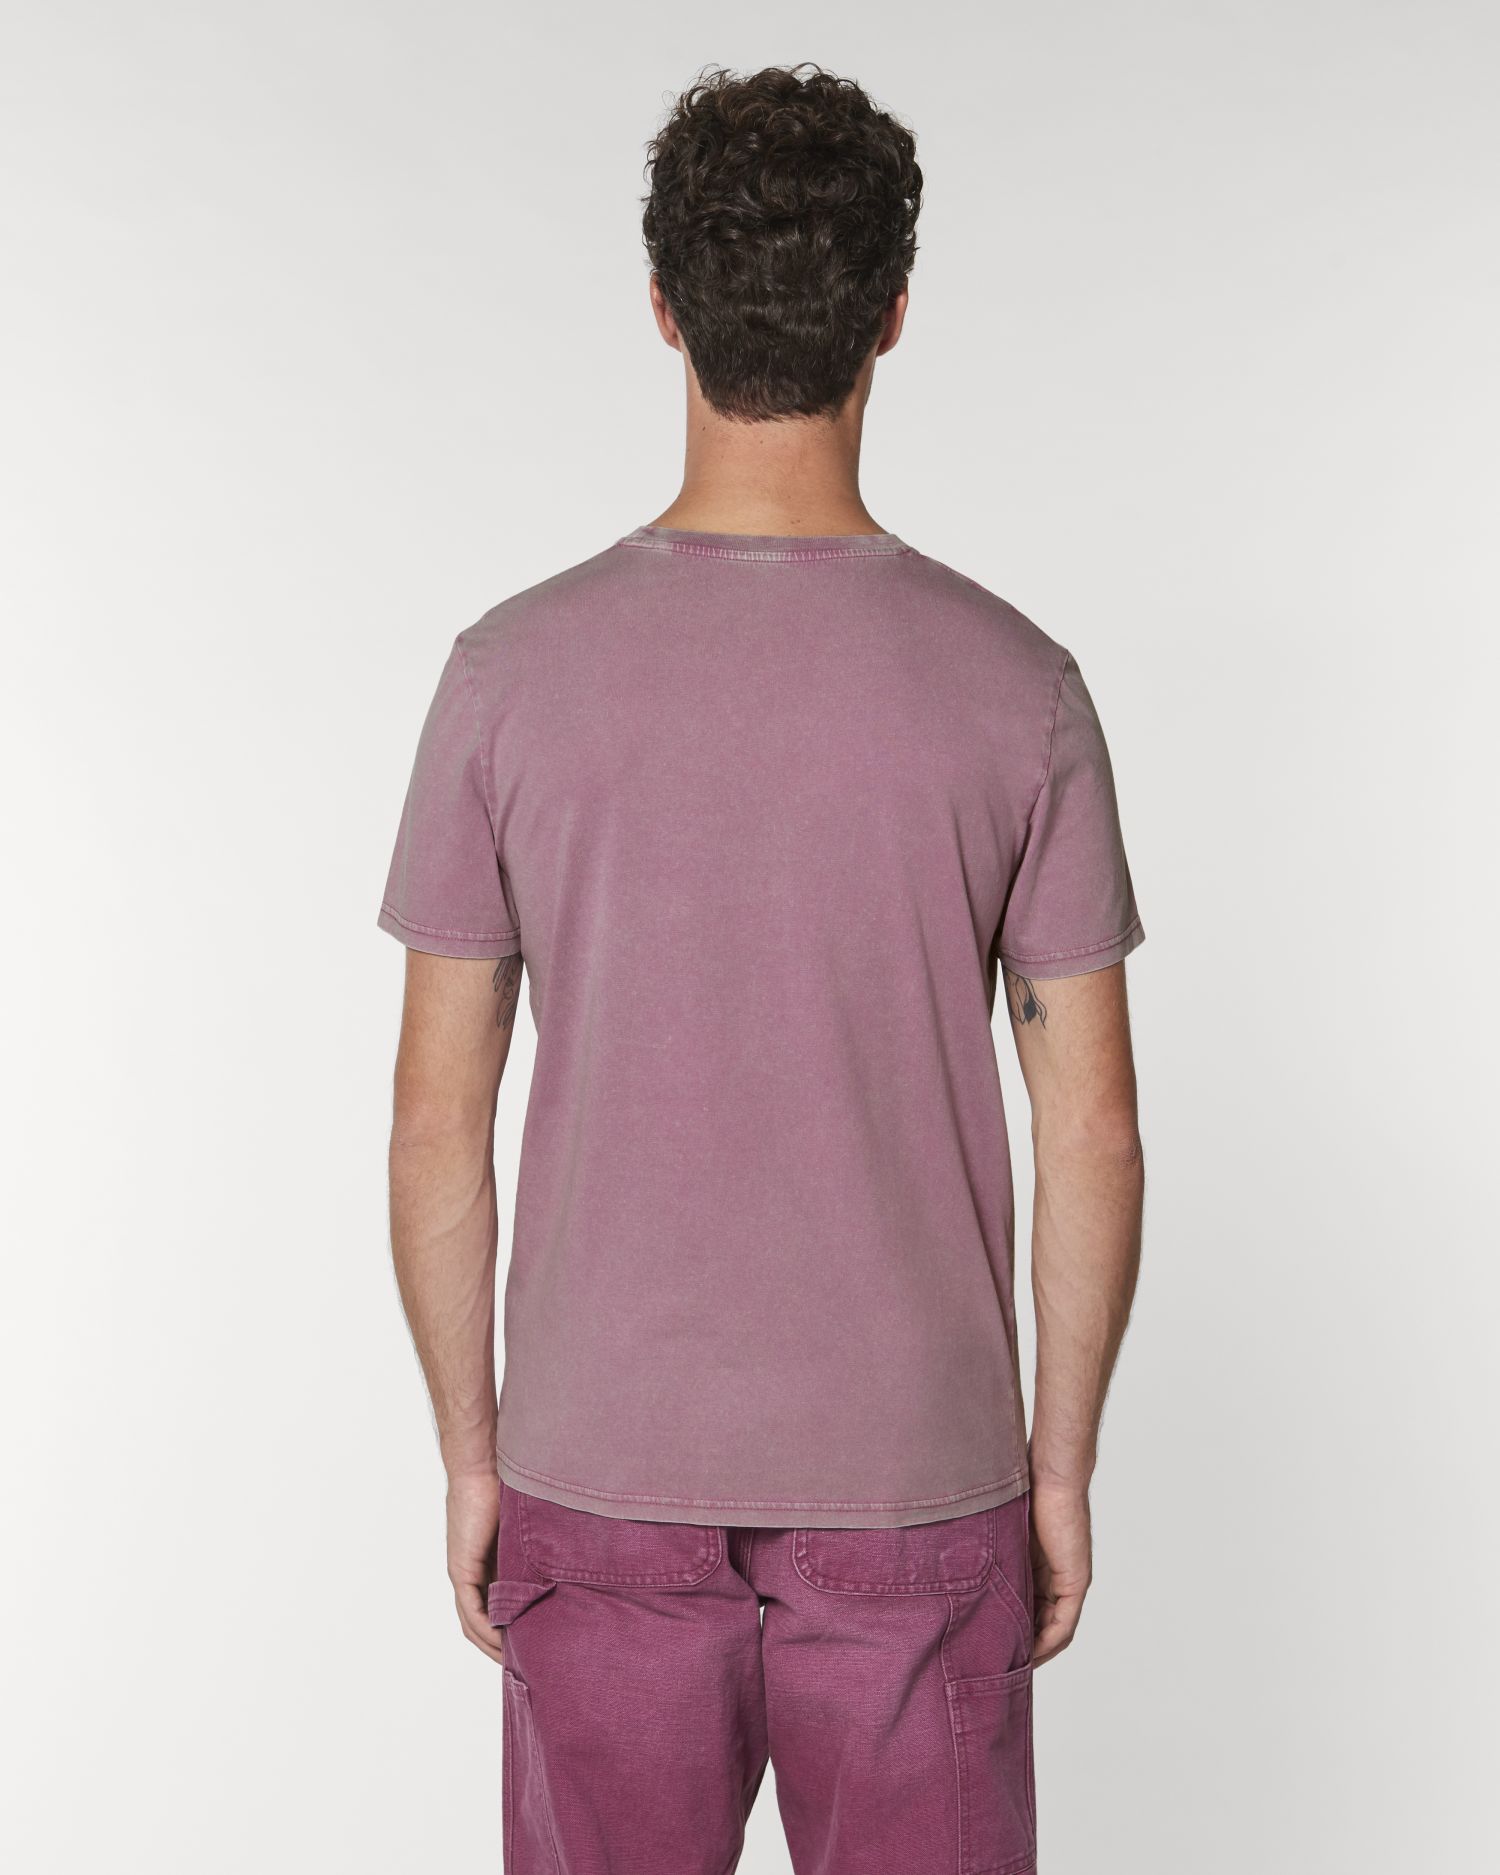 T-Shirt Creator Vintage in Farbe G. Dyed Aged Mauve